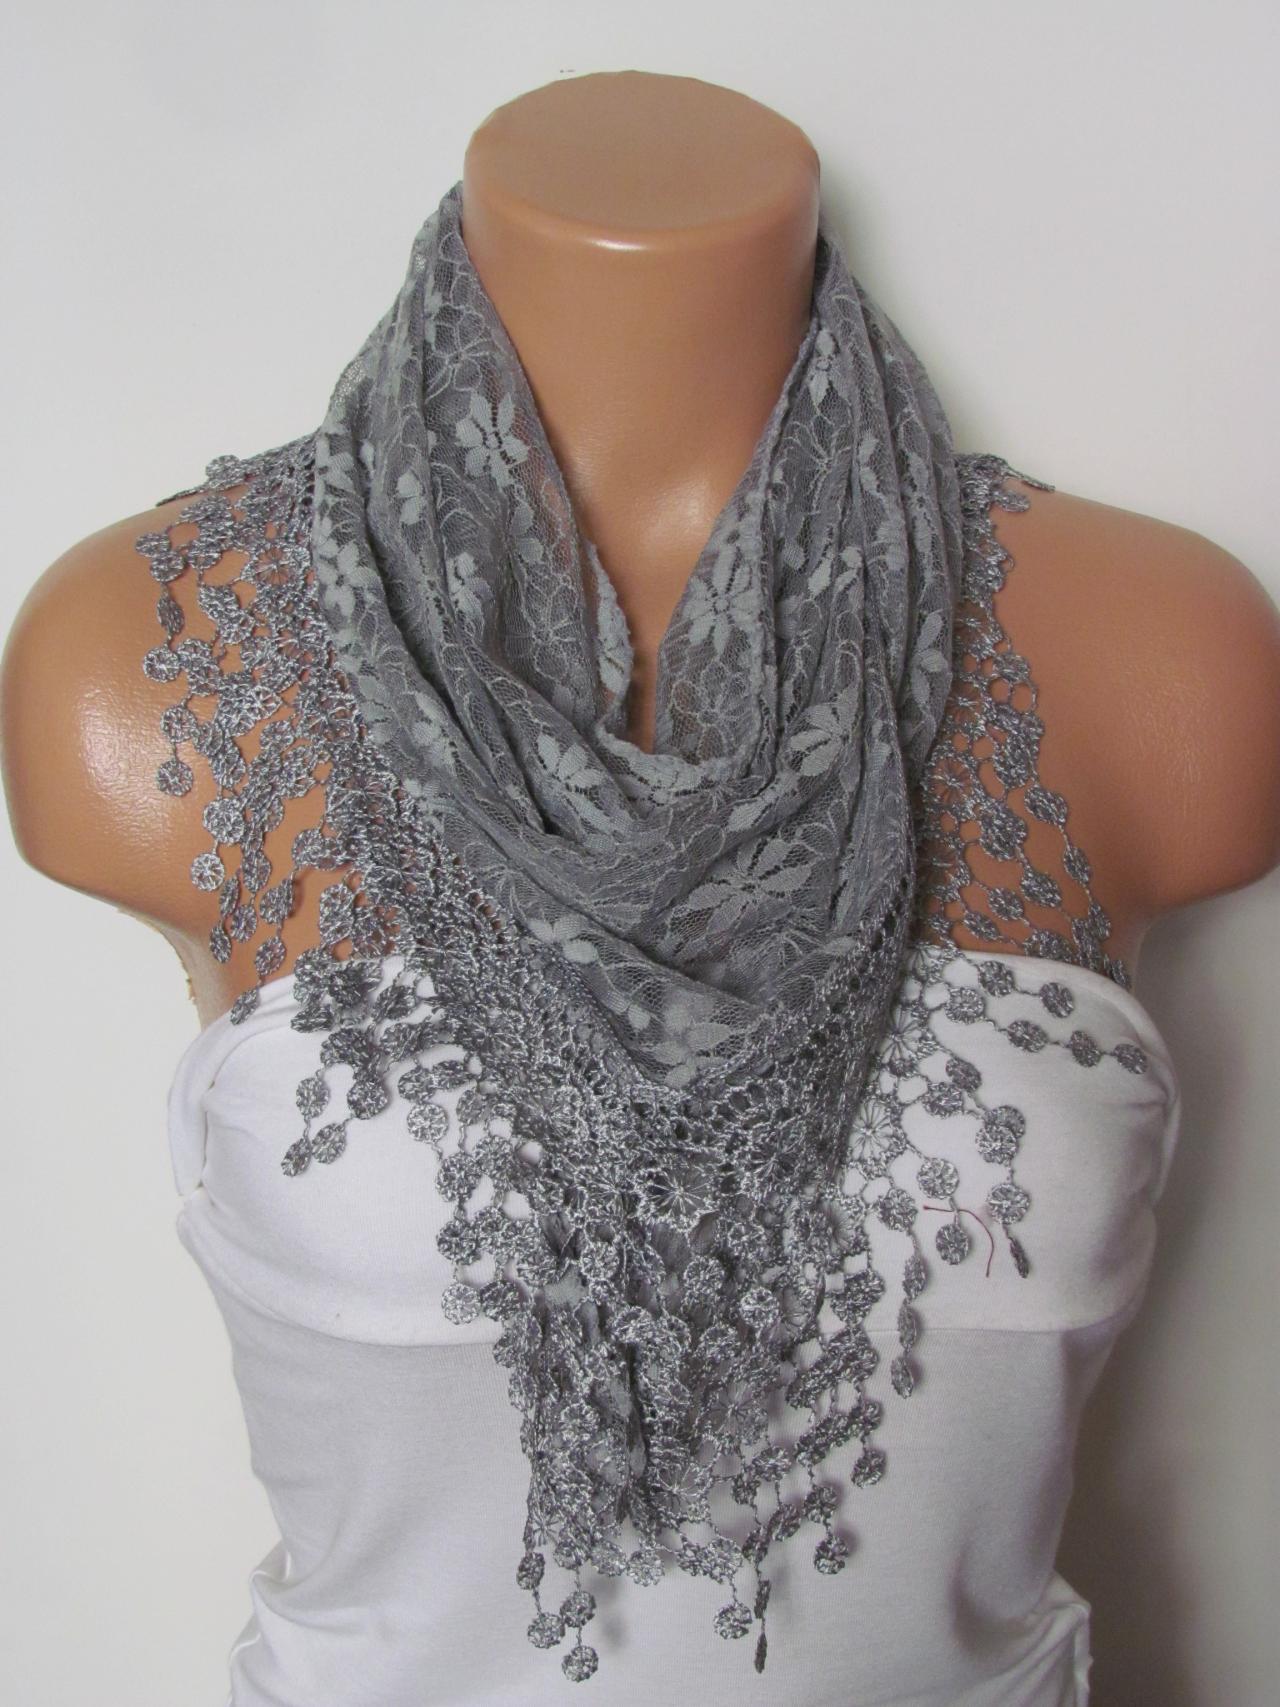 Grey Long Scarf With Fringe-Winter Fashion Scarf-Headband-Necklace- Infinity Scarf- Winter Accessory-Long Scarf